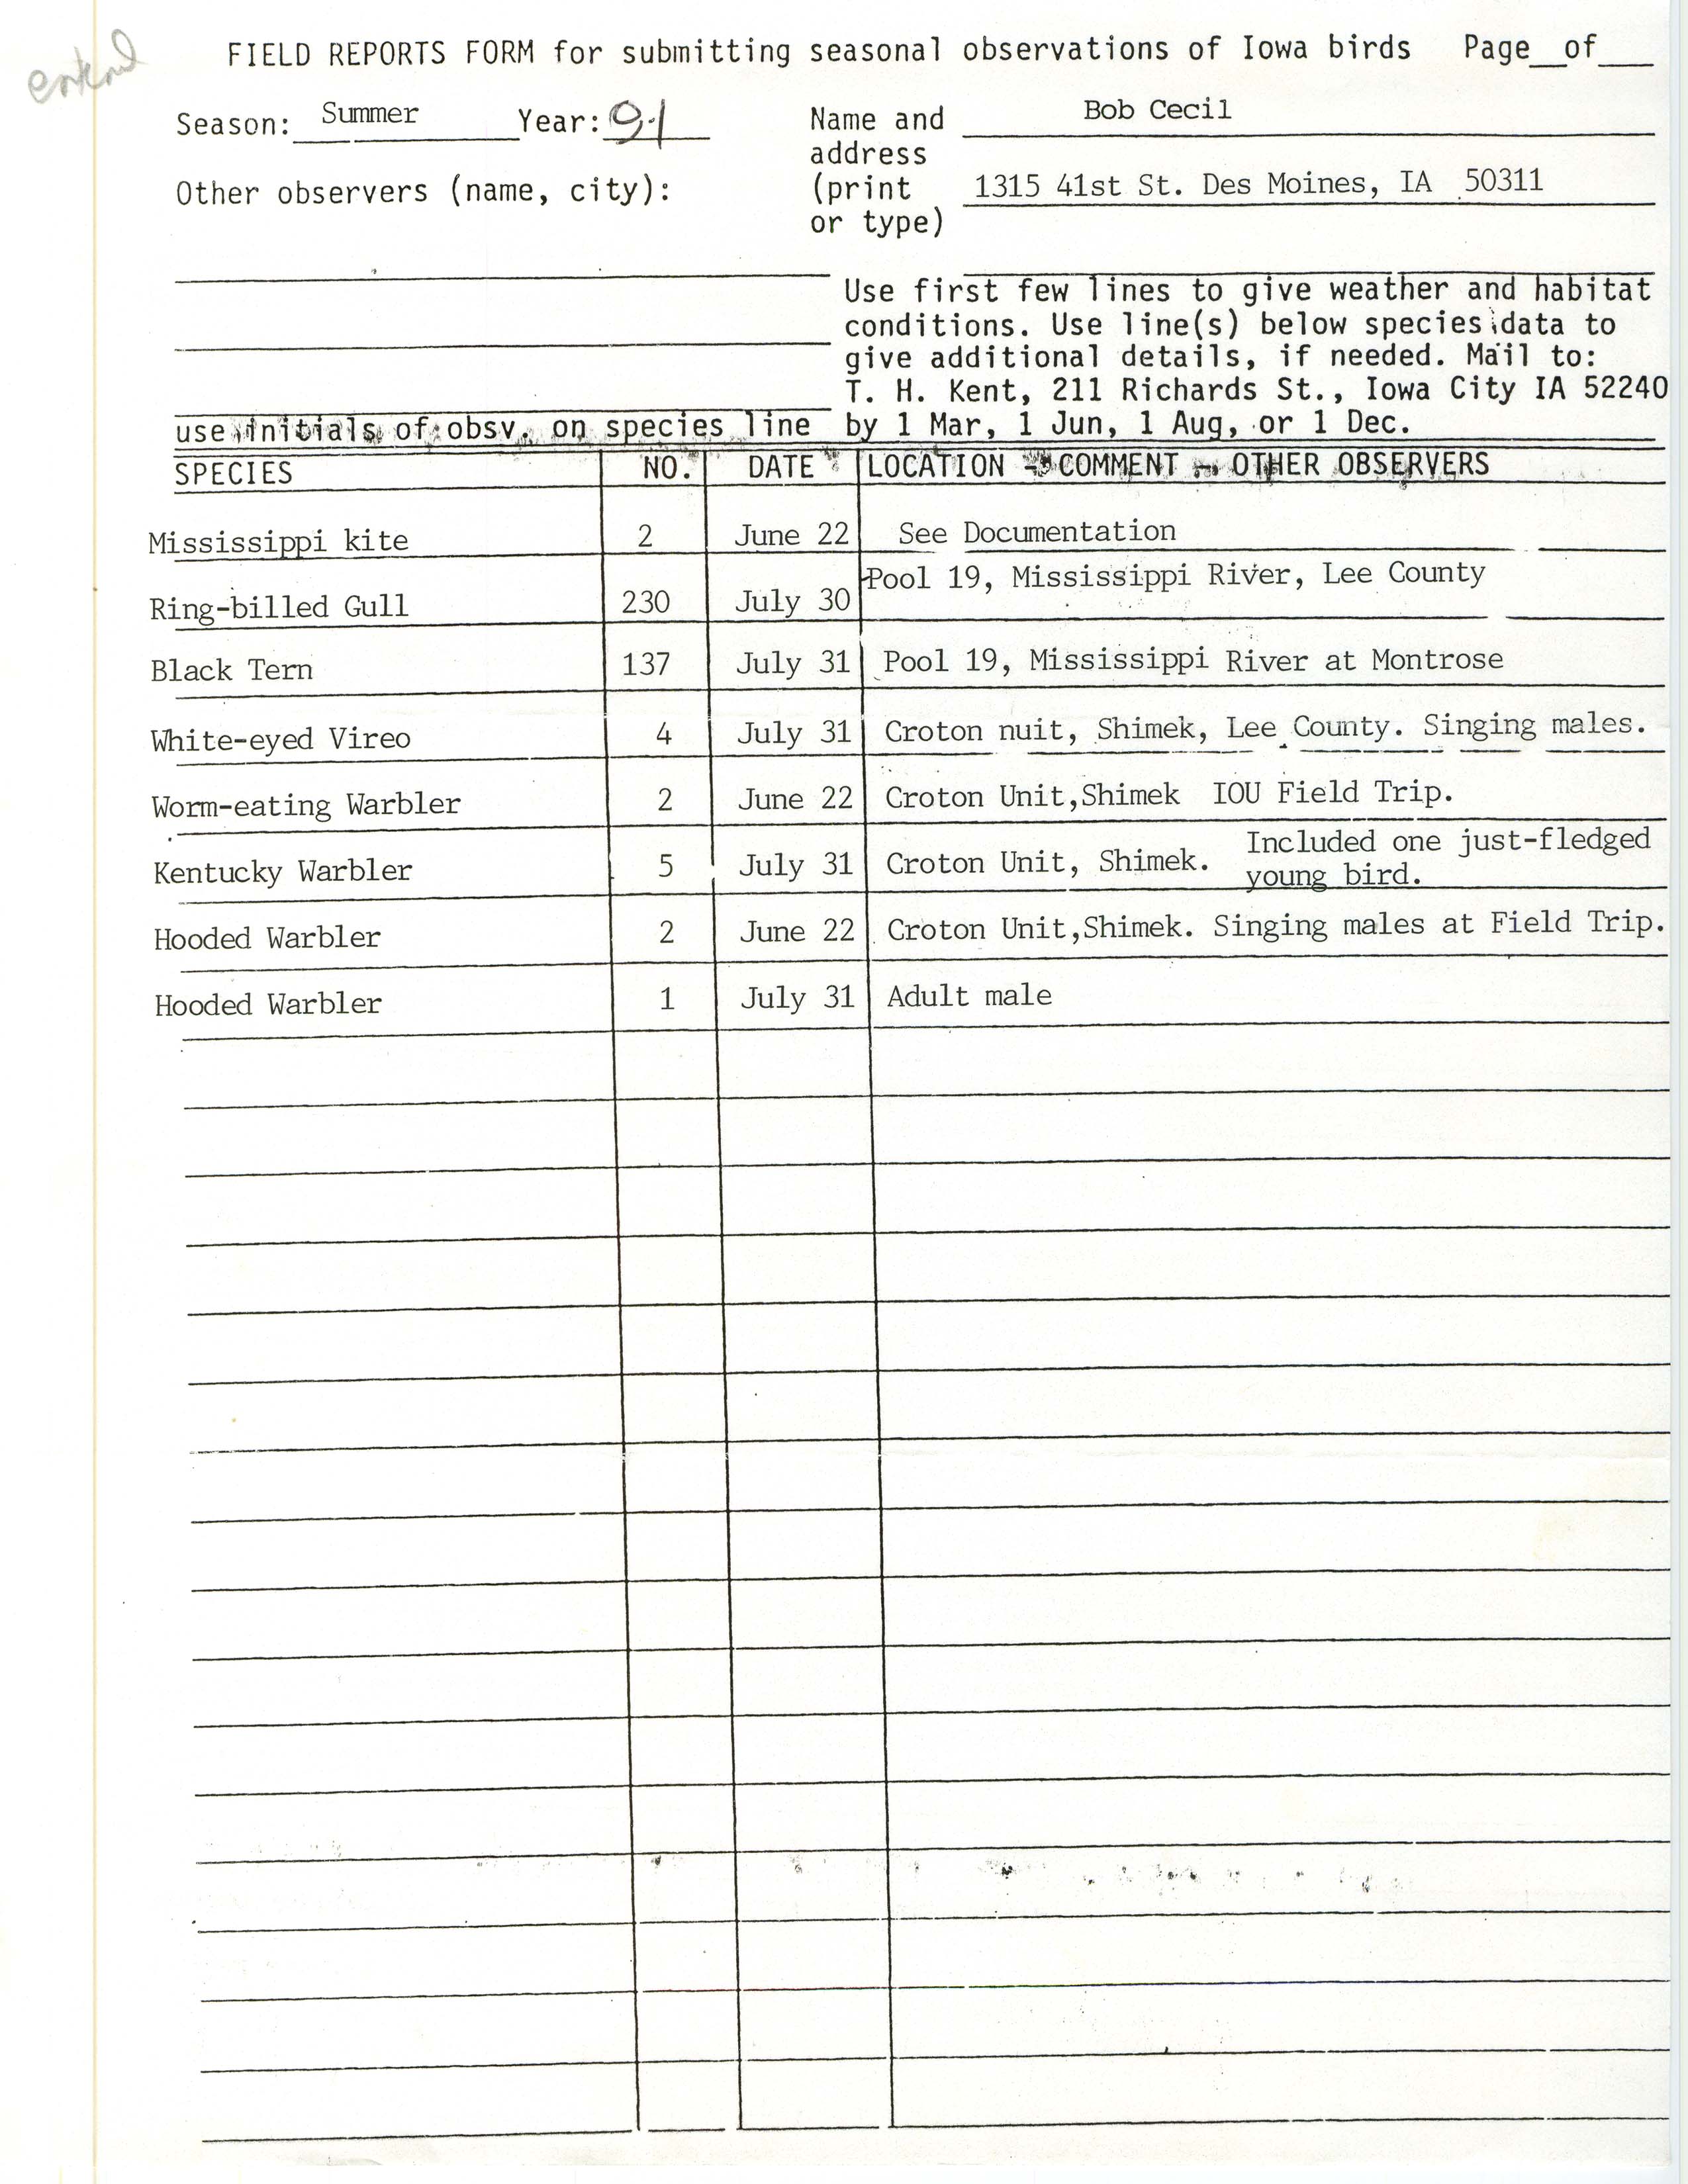 Field reports form for submitting seasonal observations of Iowa birds, Robert I. Cecil, summer 1991